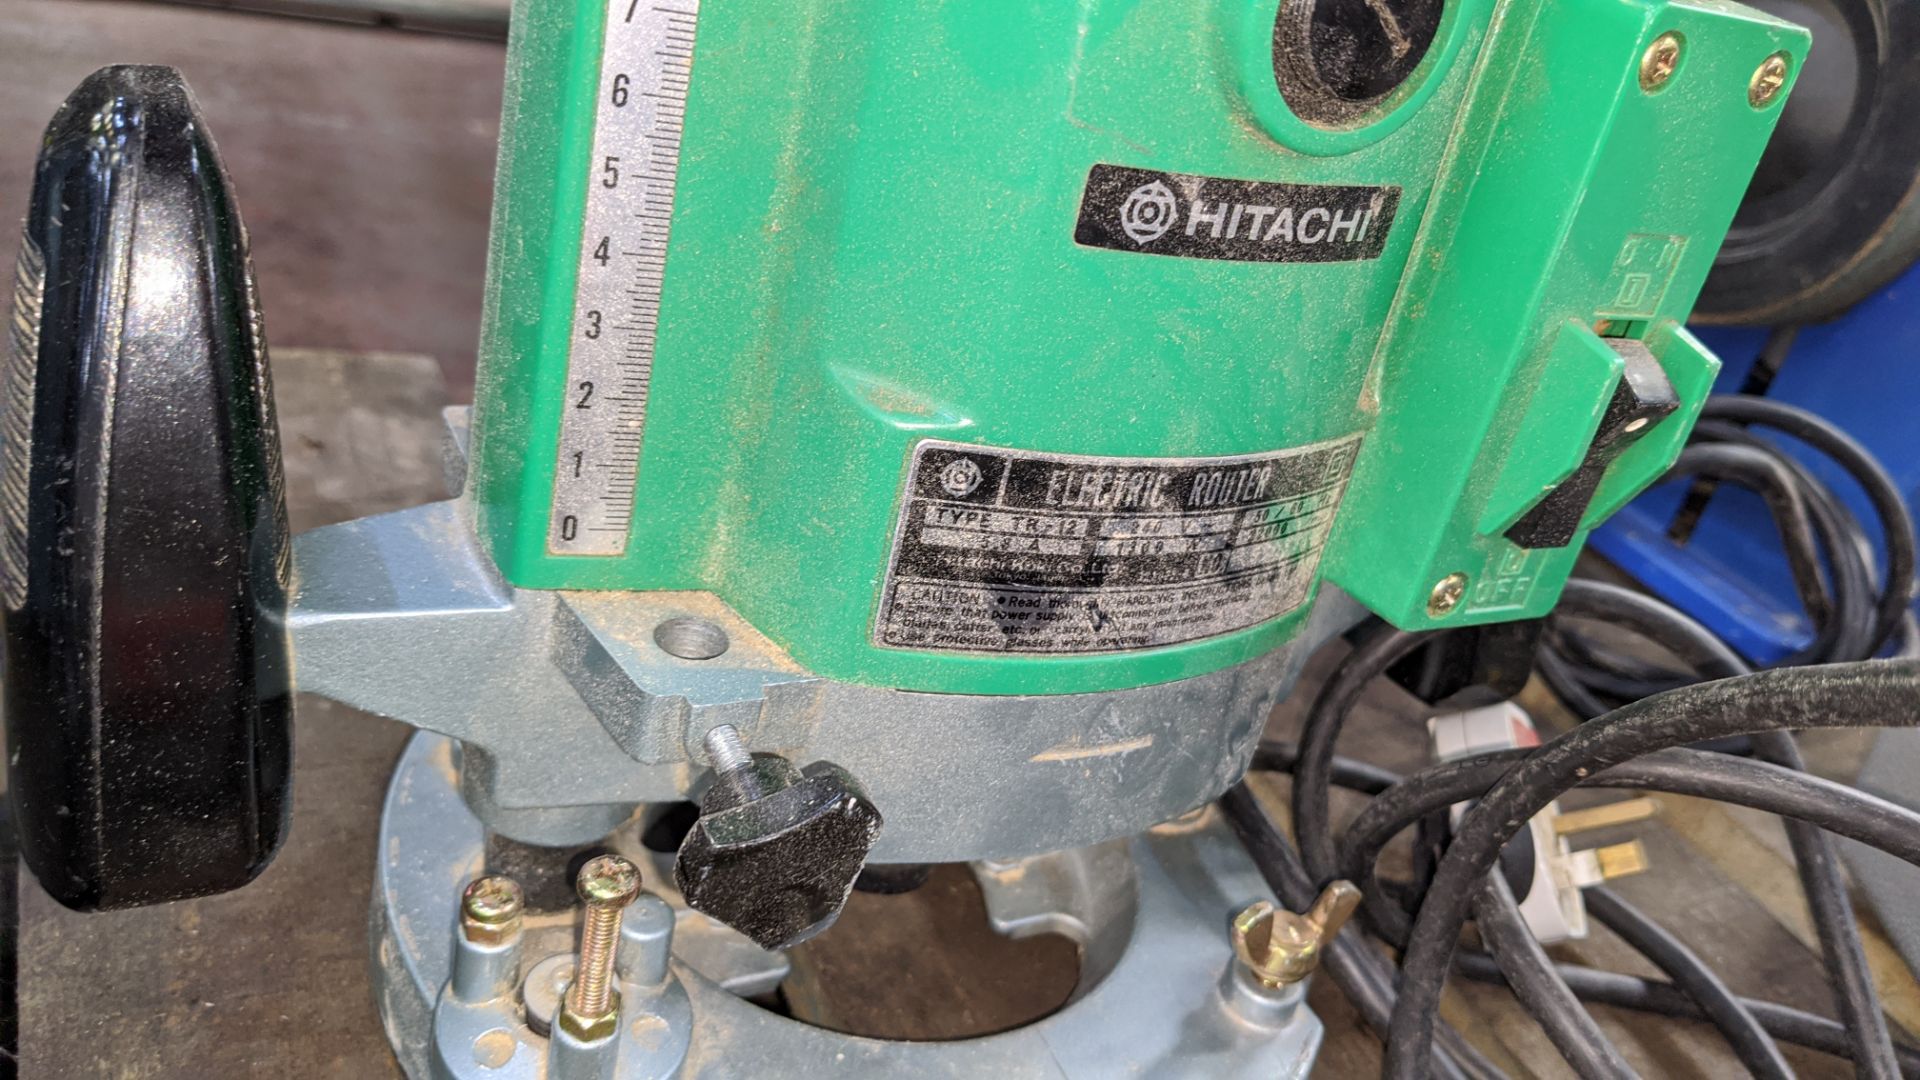 Hitachi handheld electric router Lots 51 - 480 comprise the total assets of Mills Media Ltd in - Image 3 of 4